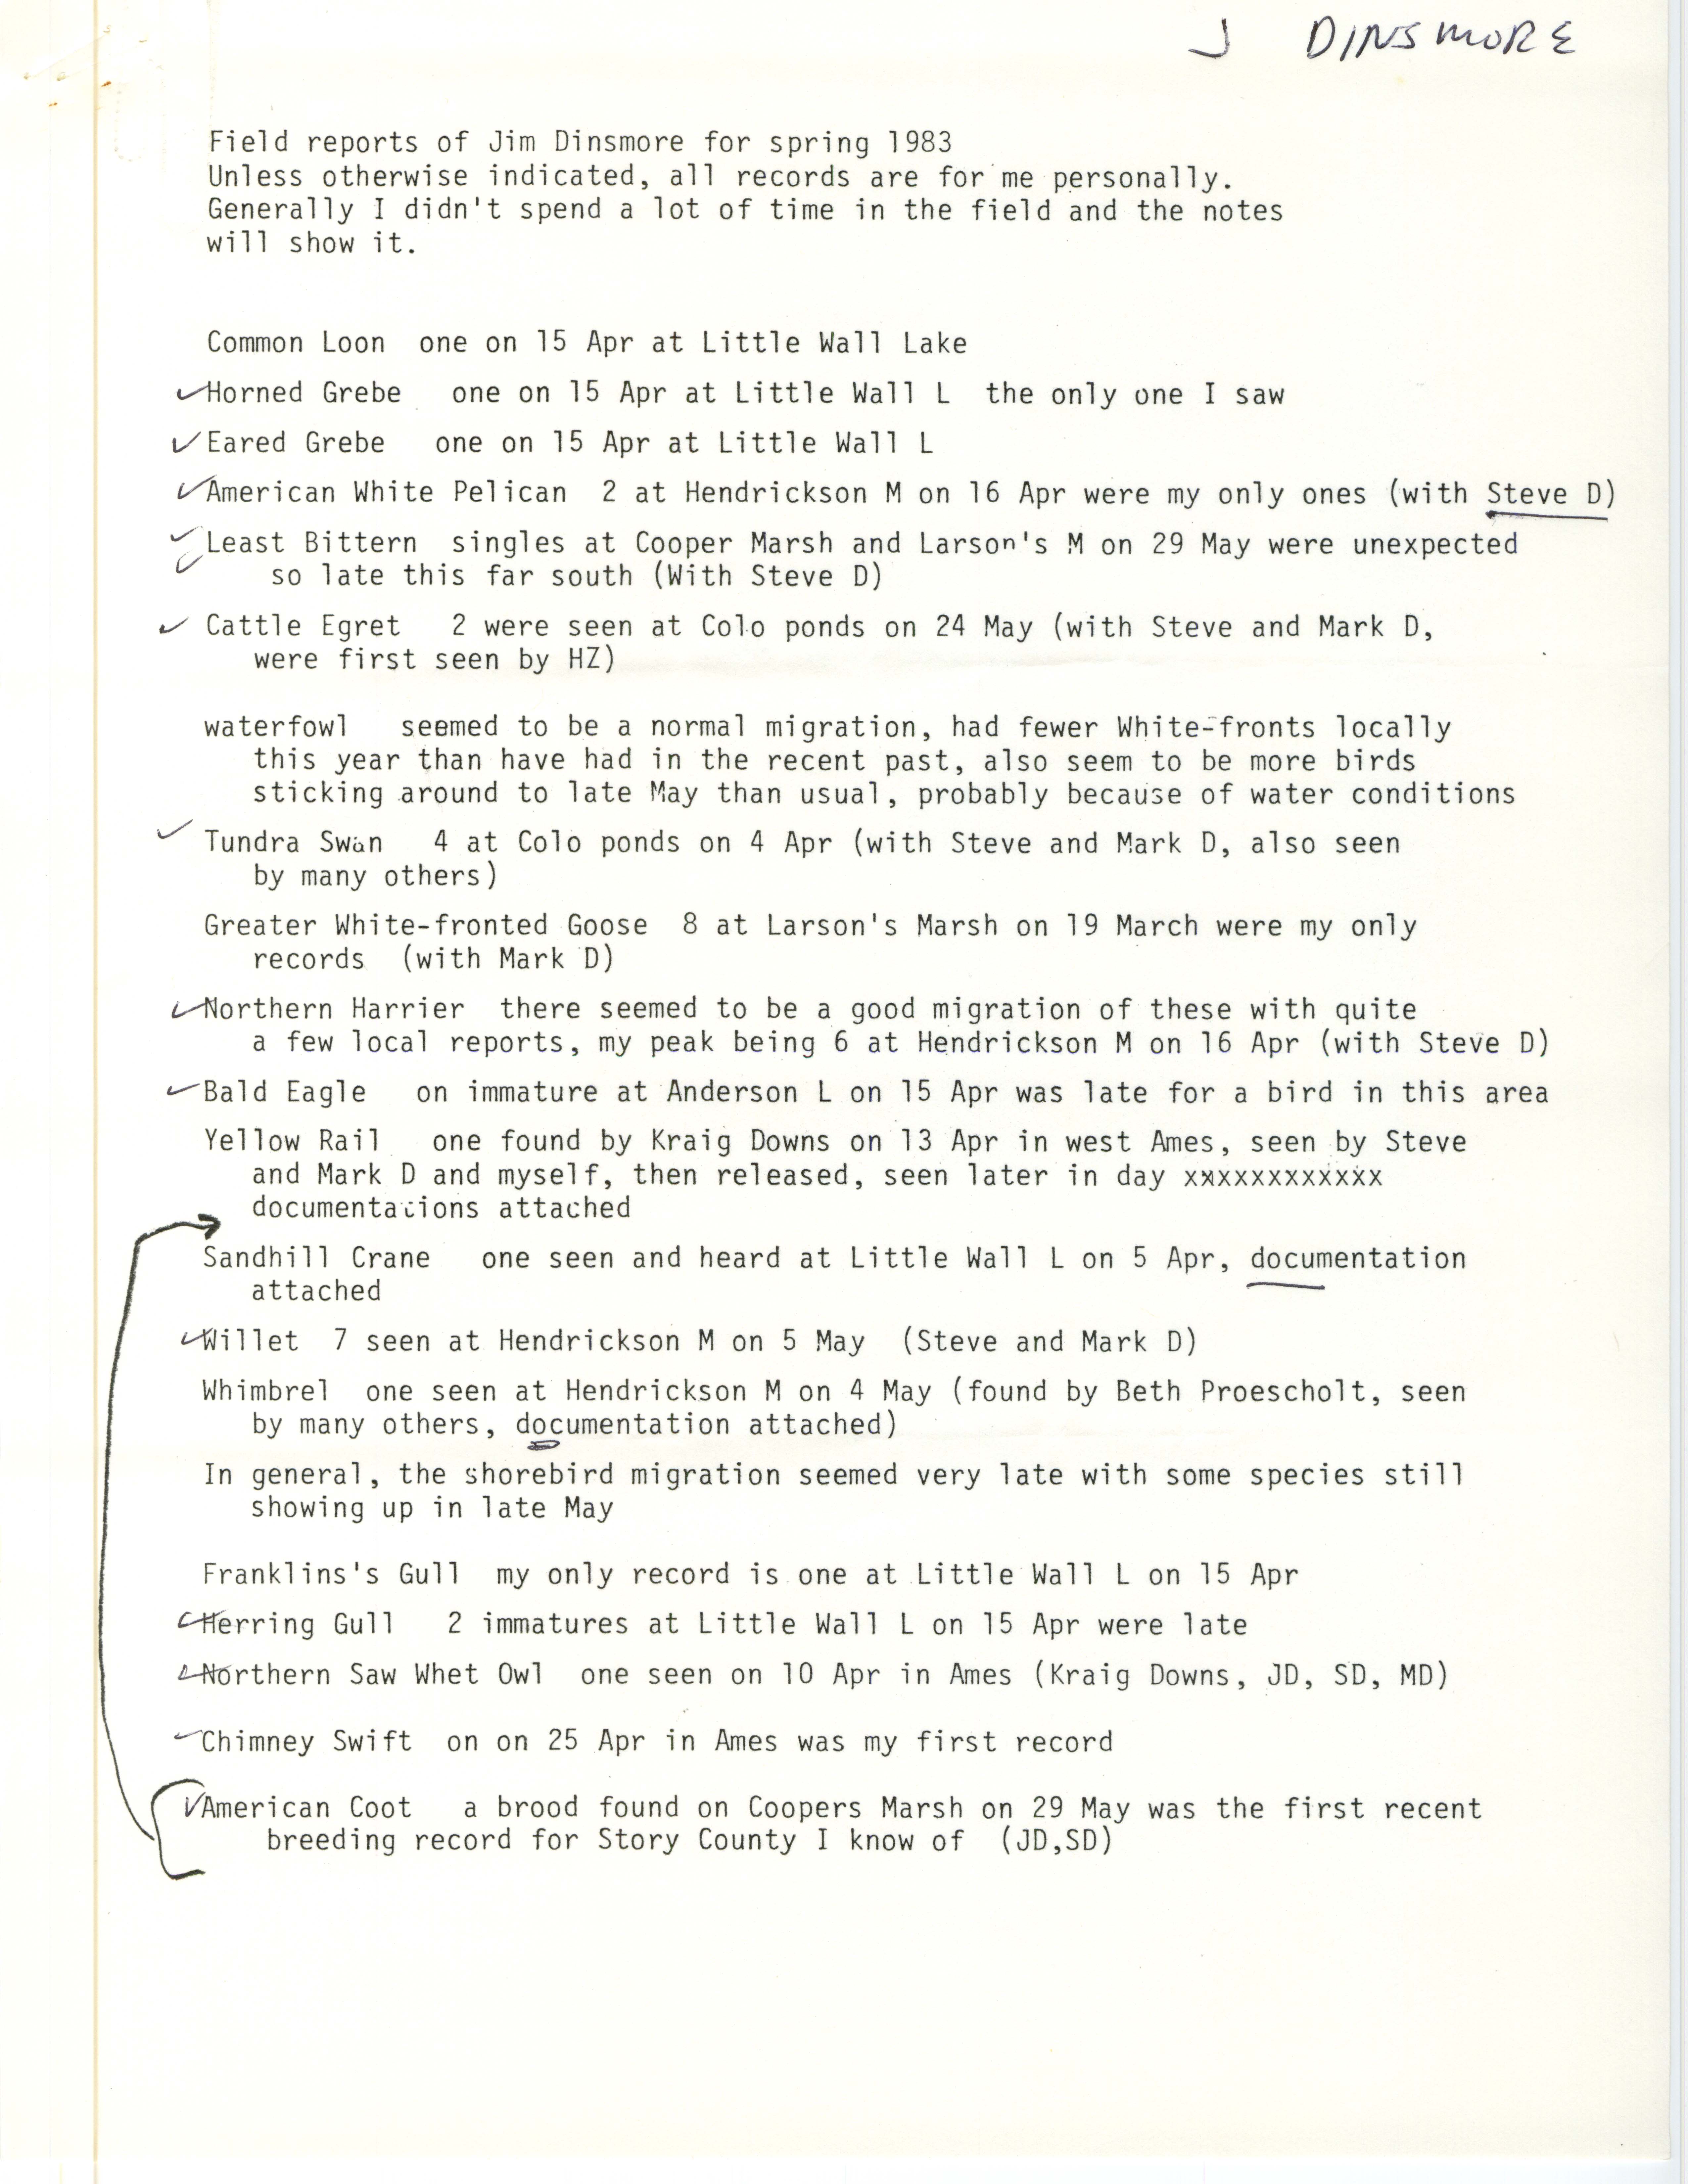 Field notes contributed by James J. Dinsmore, spring 1983